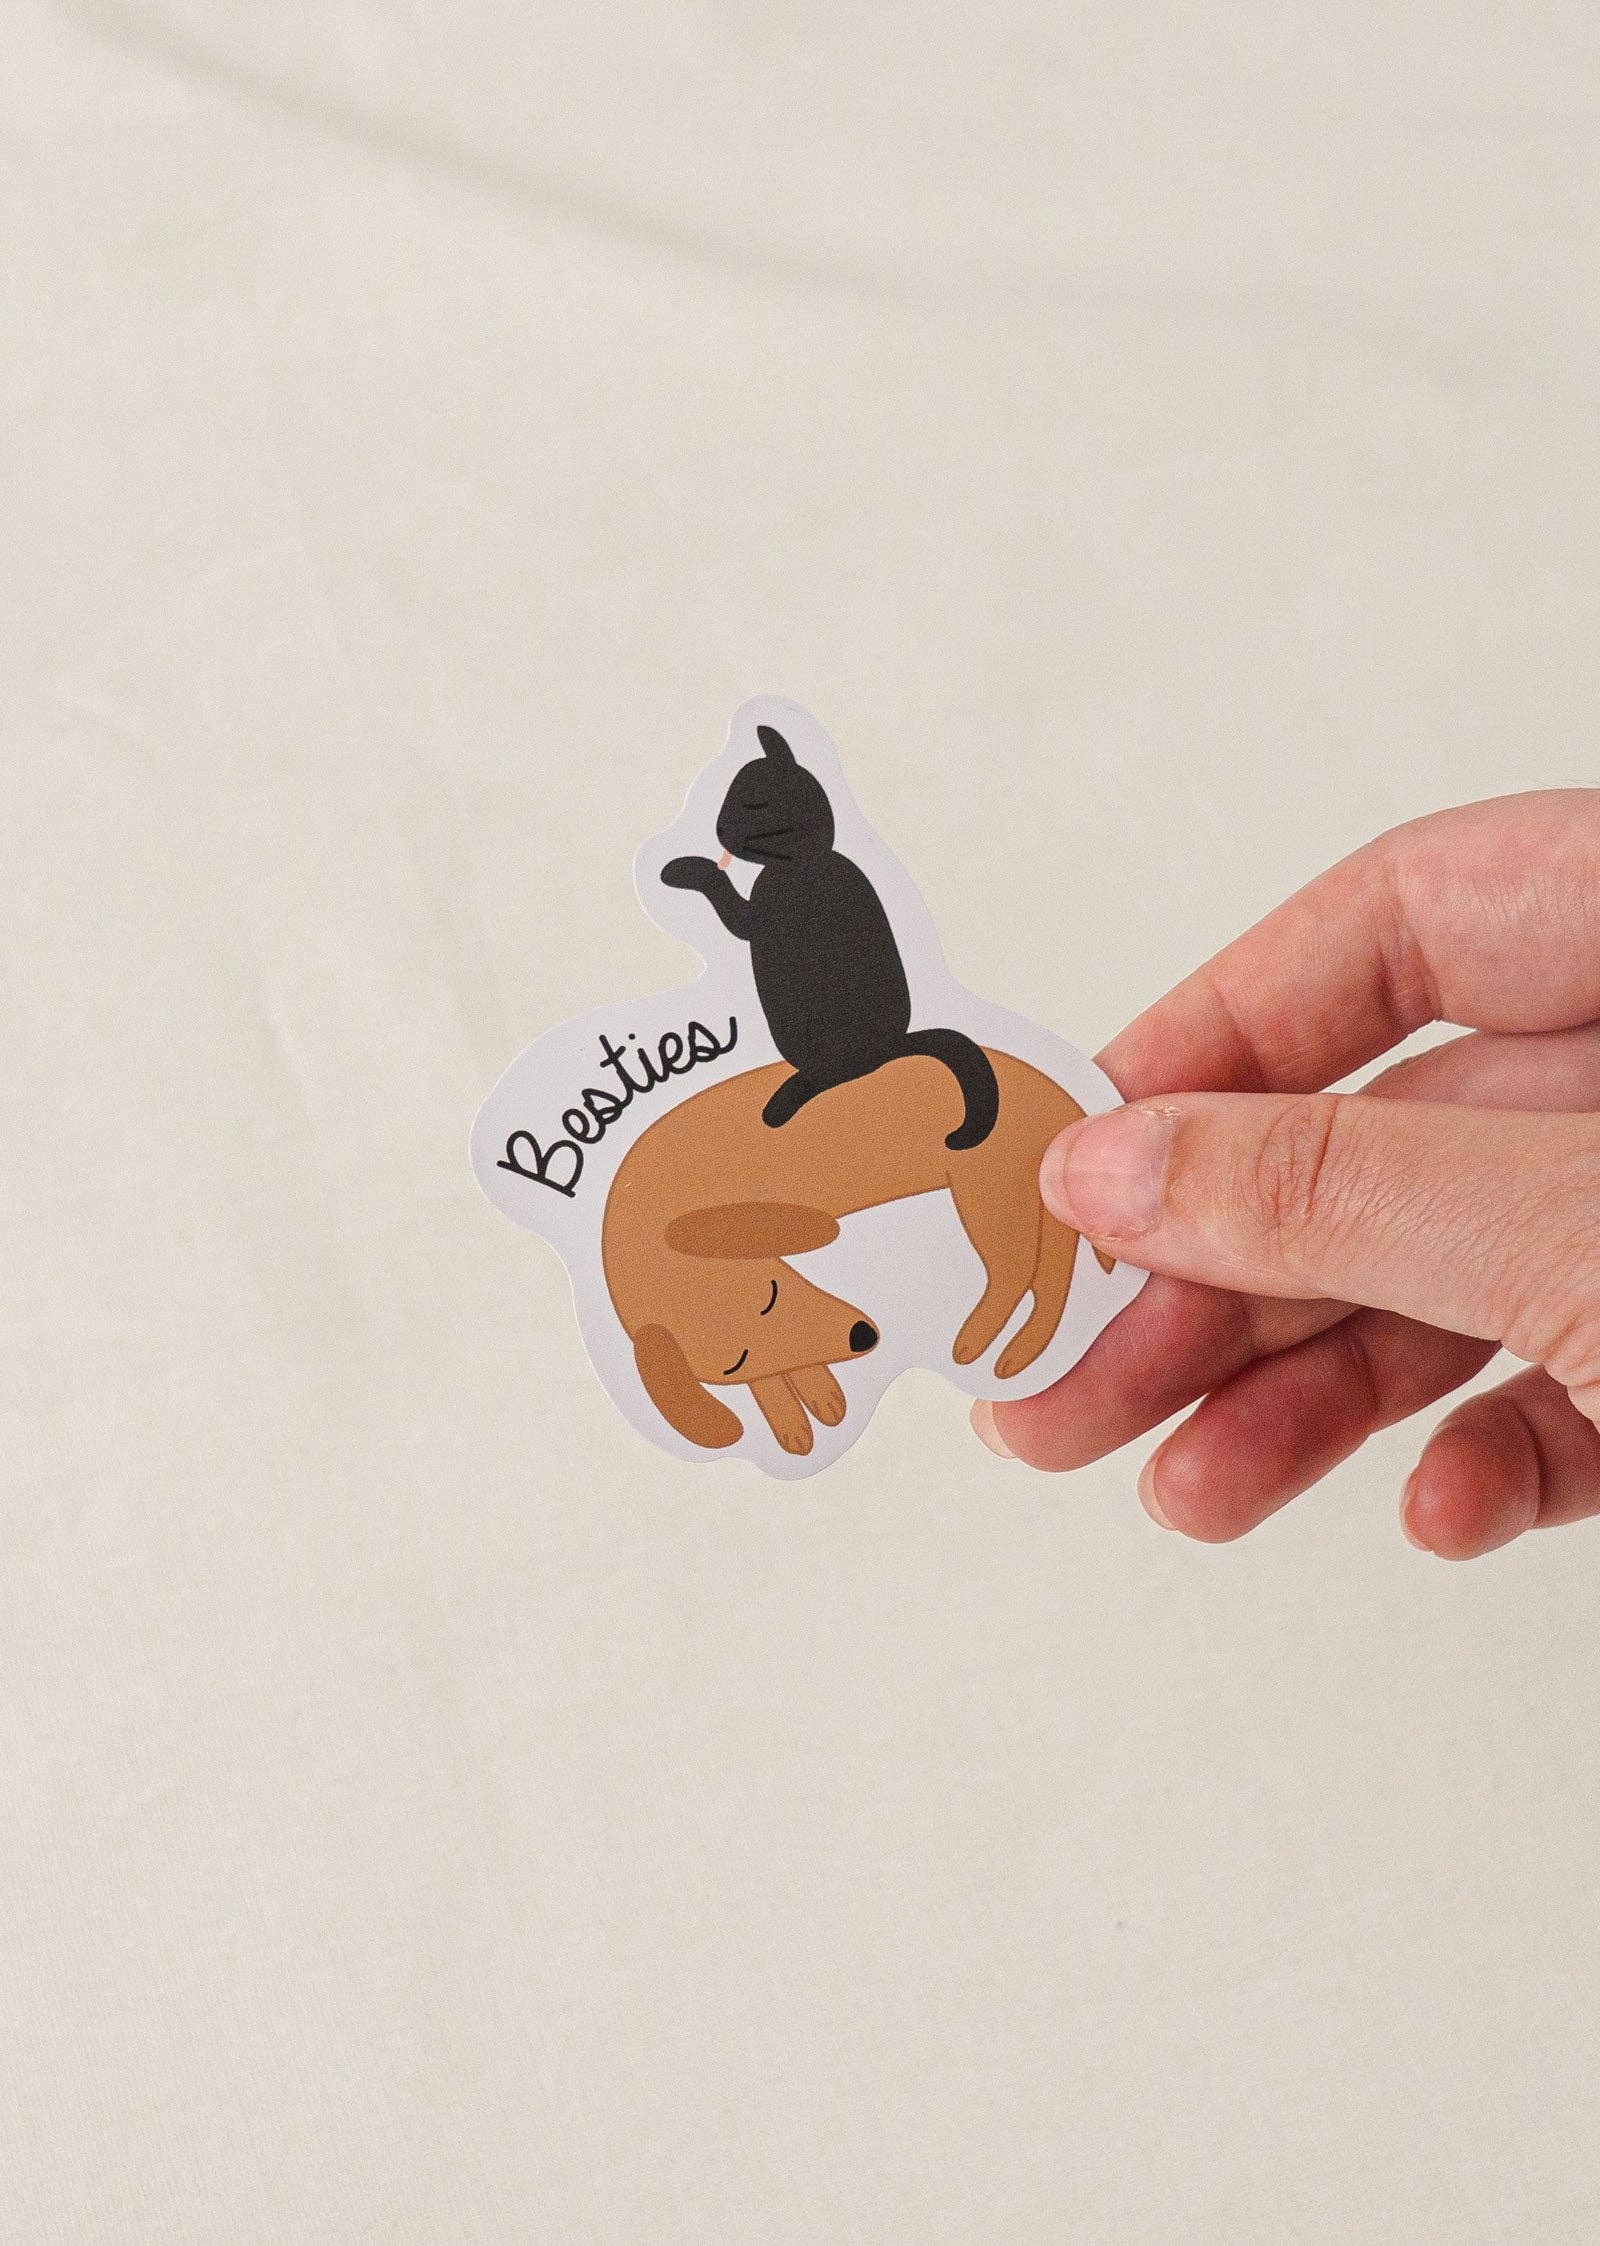 Besties - Vinyl Sticker - Out of the Blue